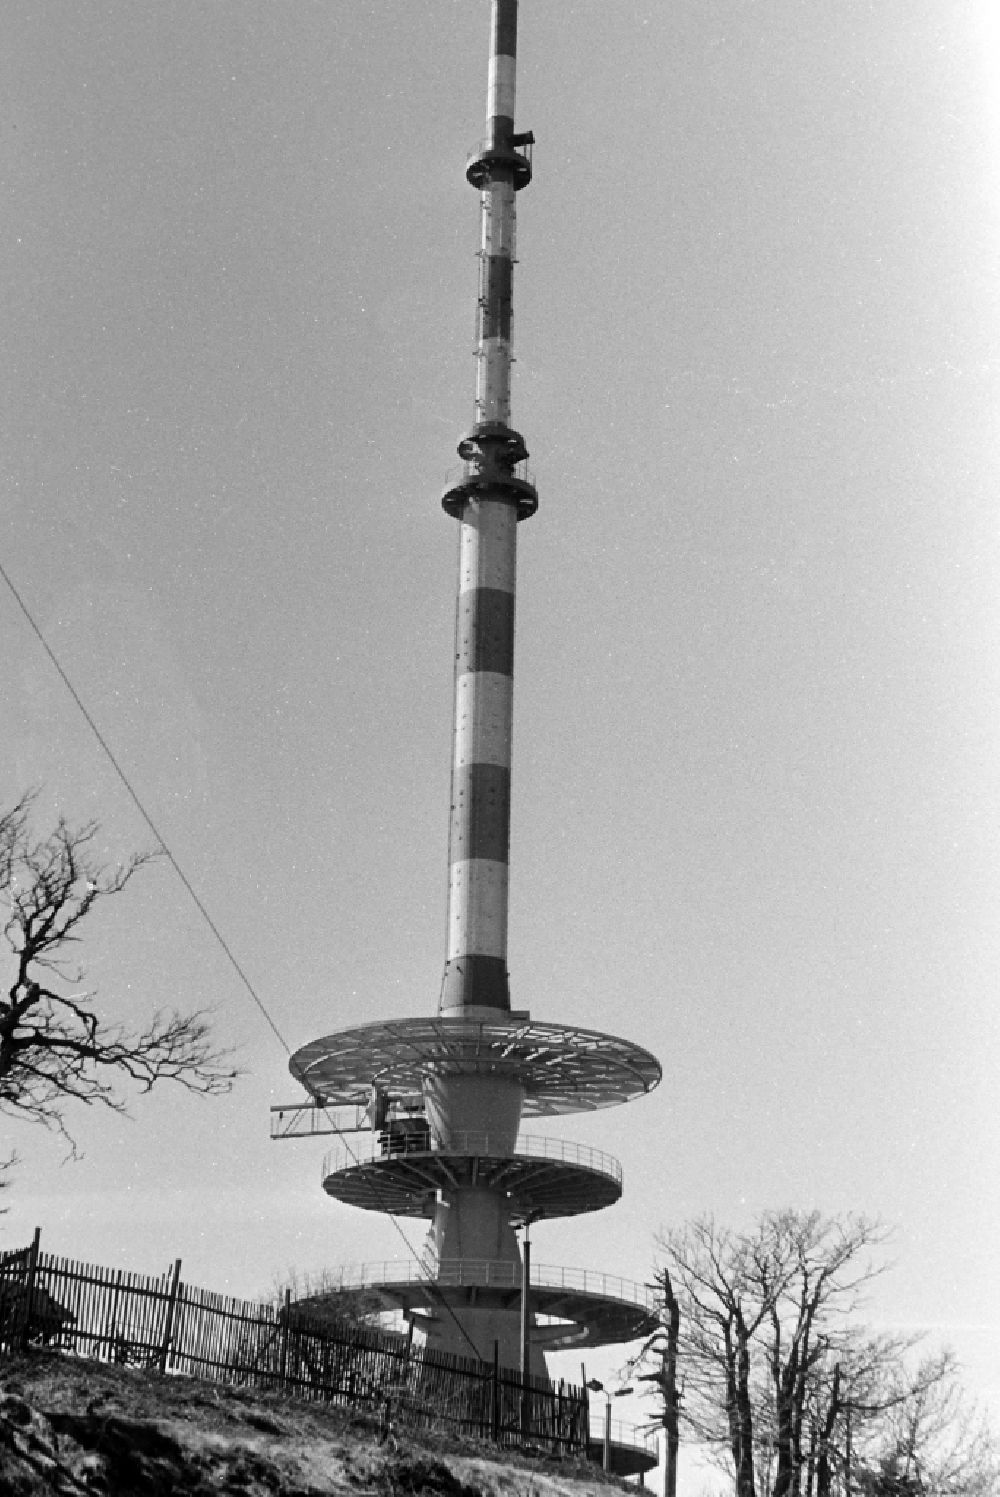 GDR picture archive: Brotterode - Television Tower Grosser Inselsberg in Brotterode, Thuringia on the territory of the former GDR, German Democratic Republic